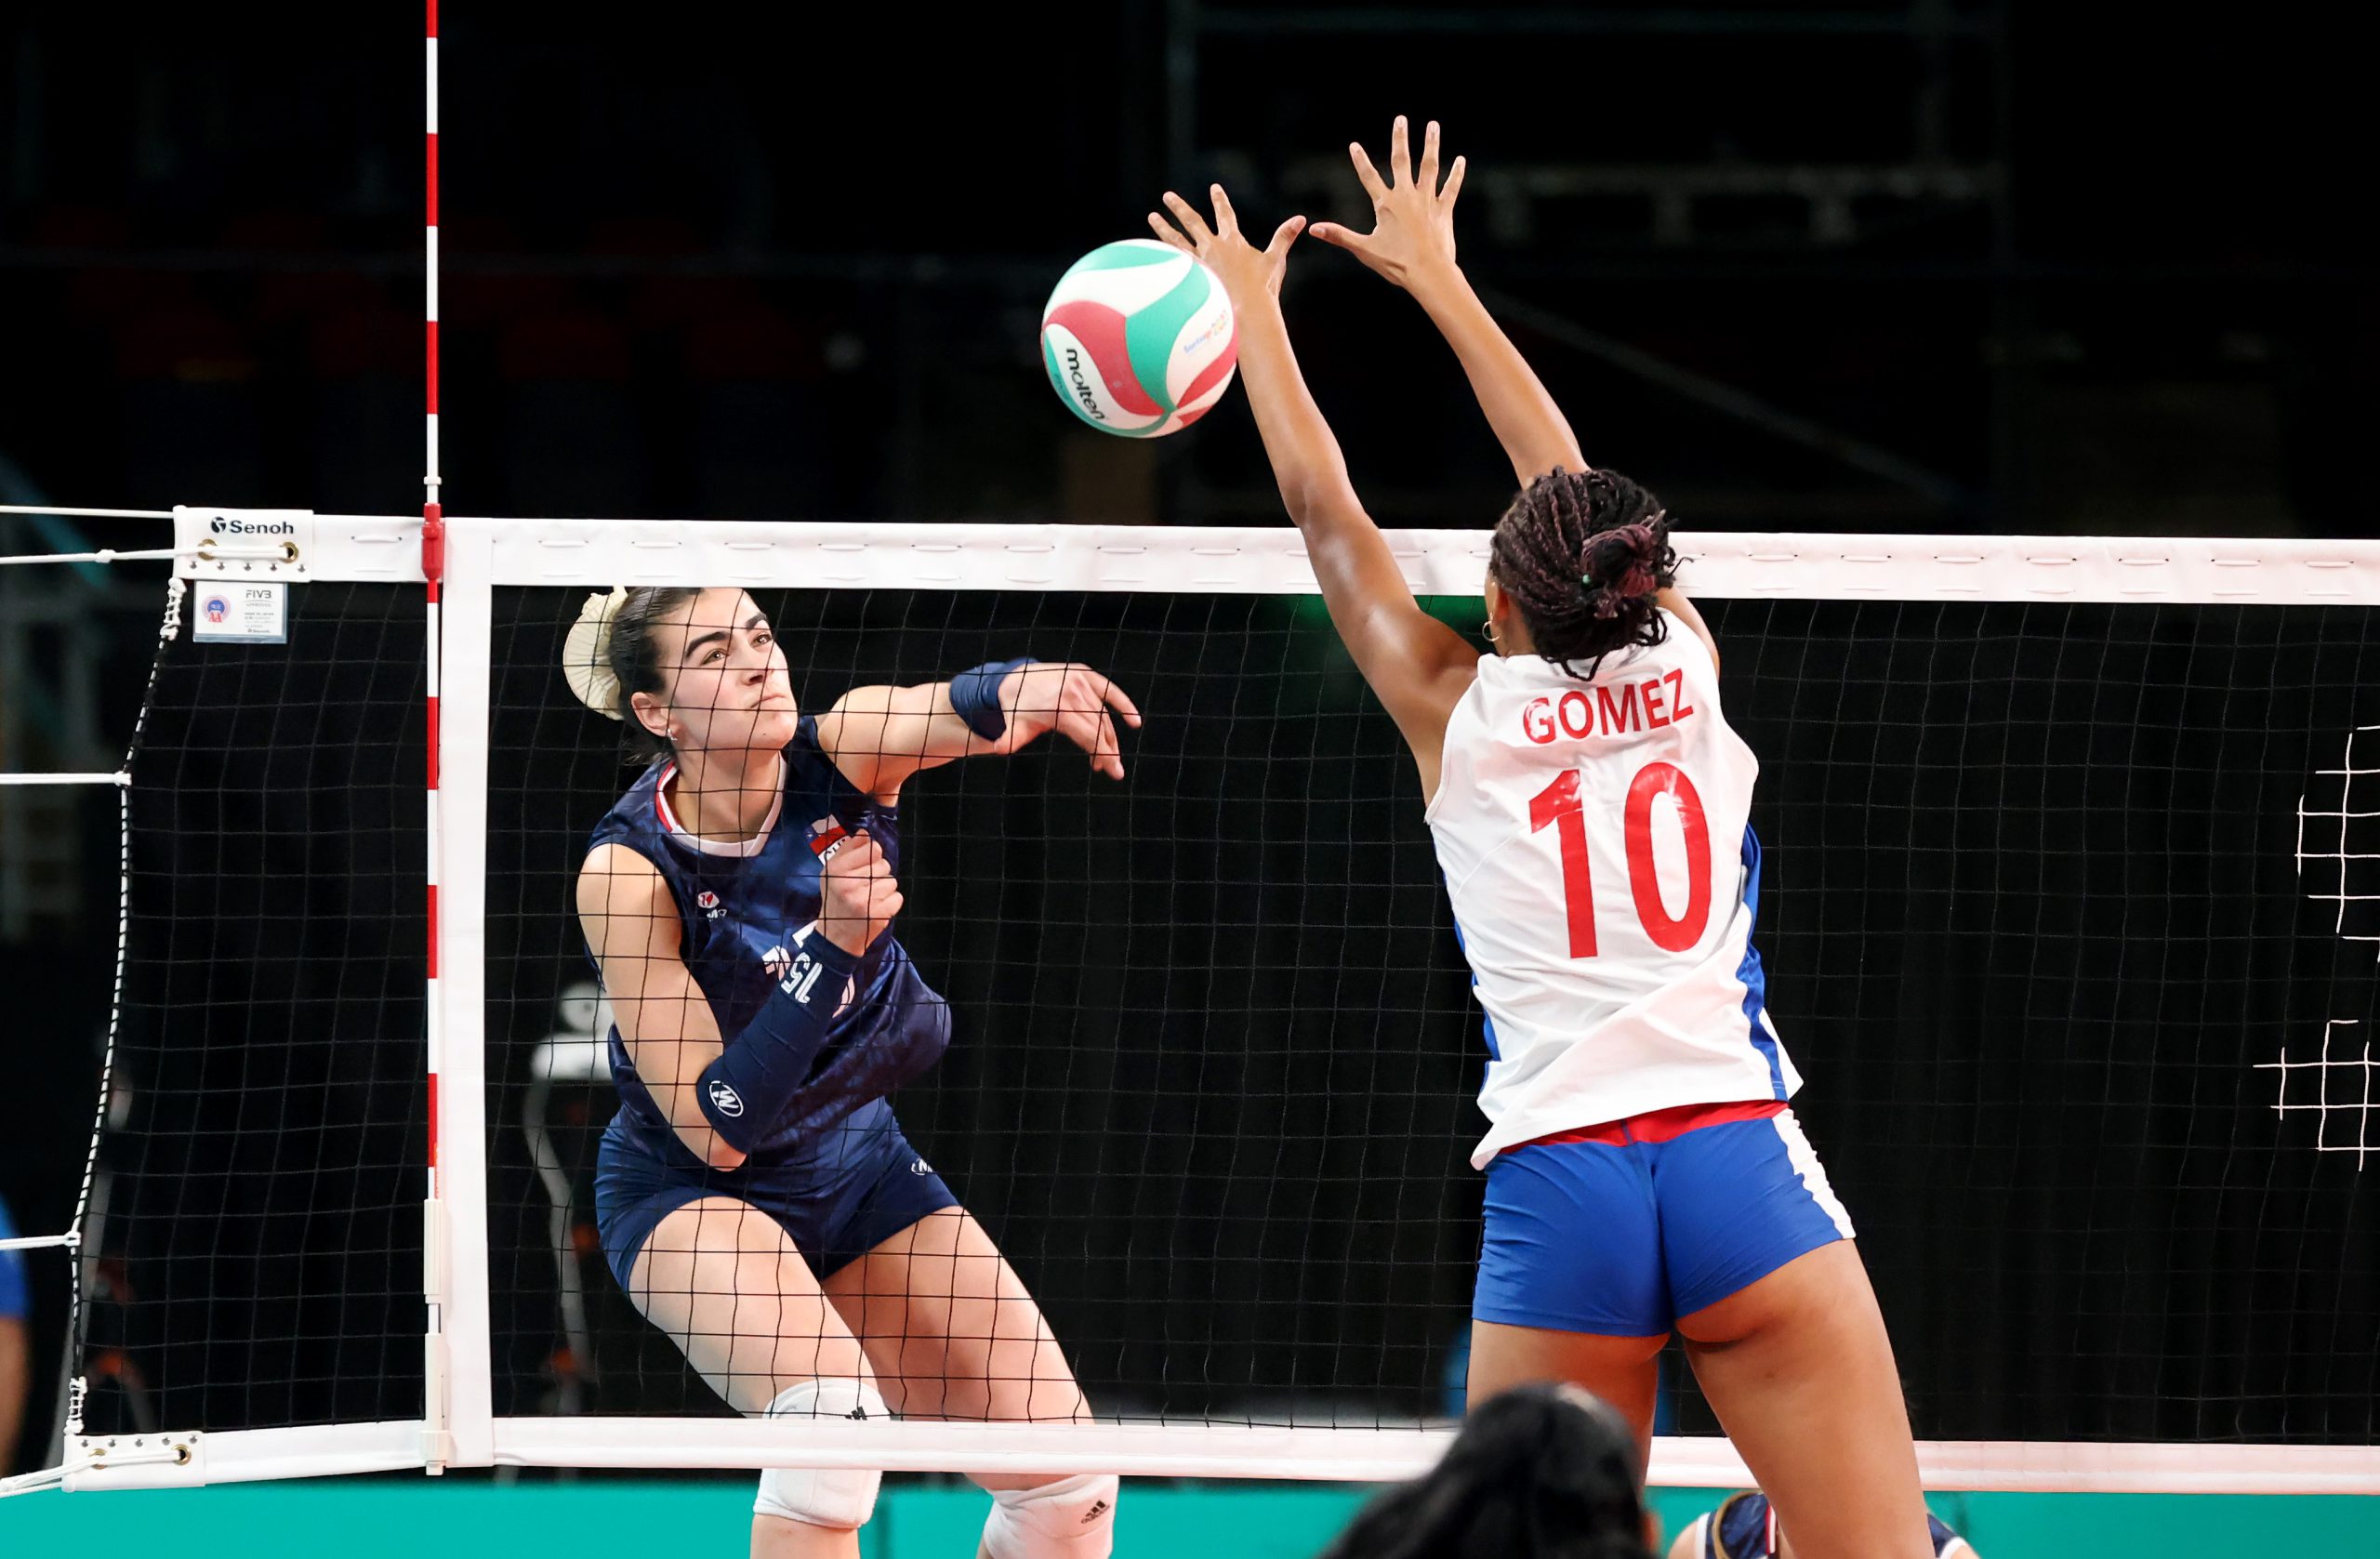 Chile beat Cuba to face Colombia for fifth place at Pan American Games